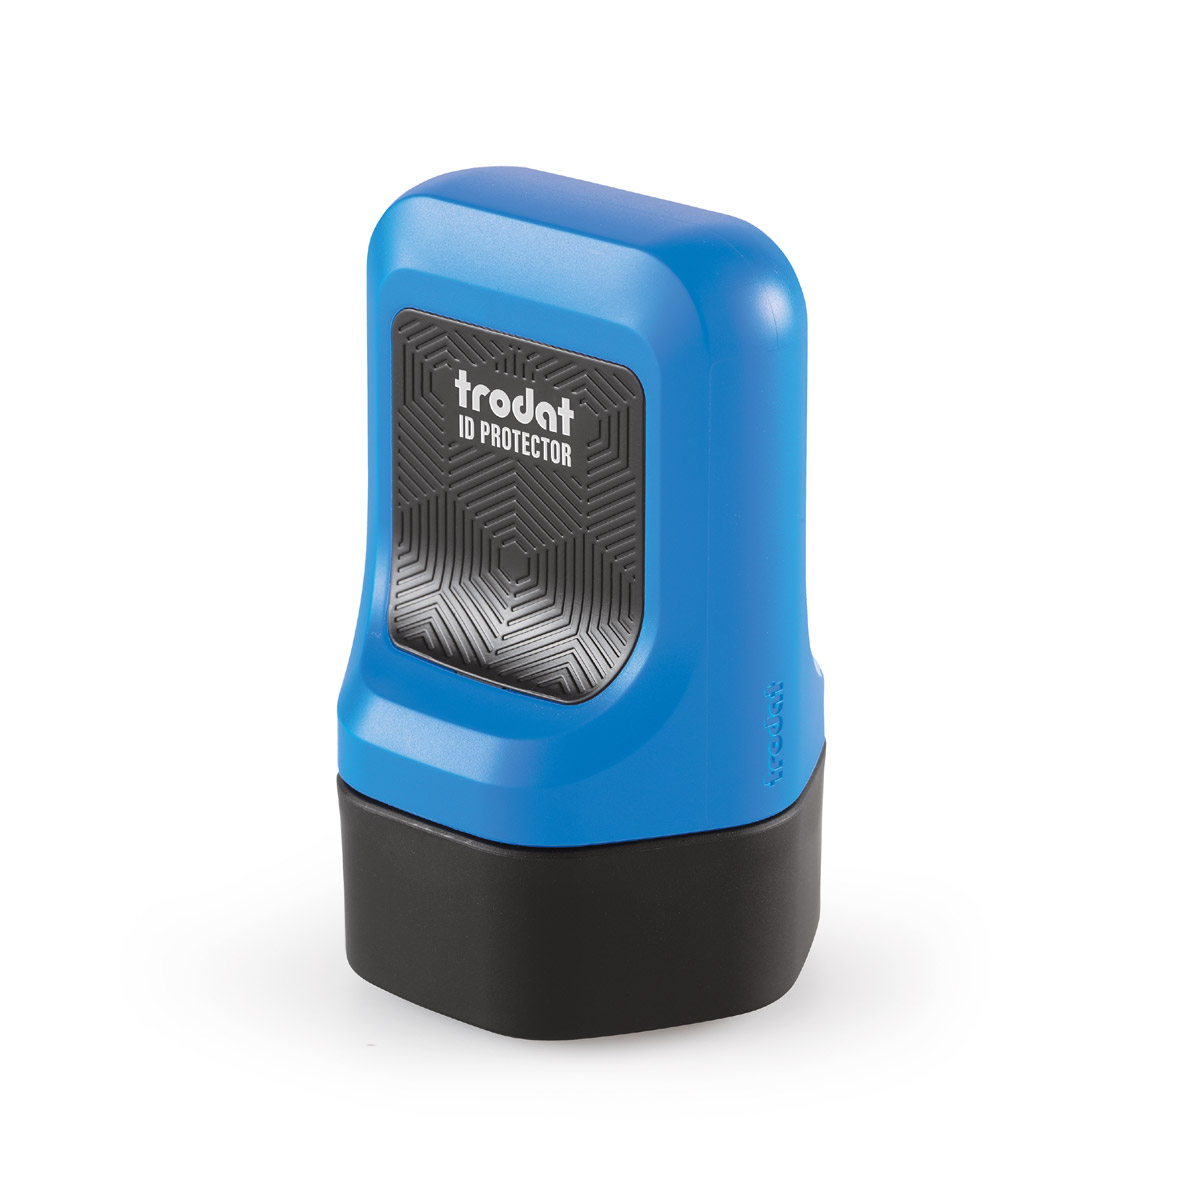 trodat identity theft protection roller stamp